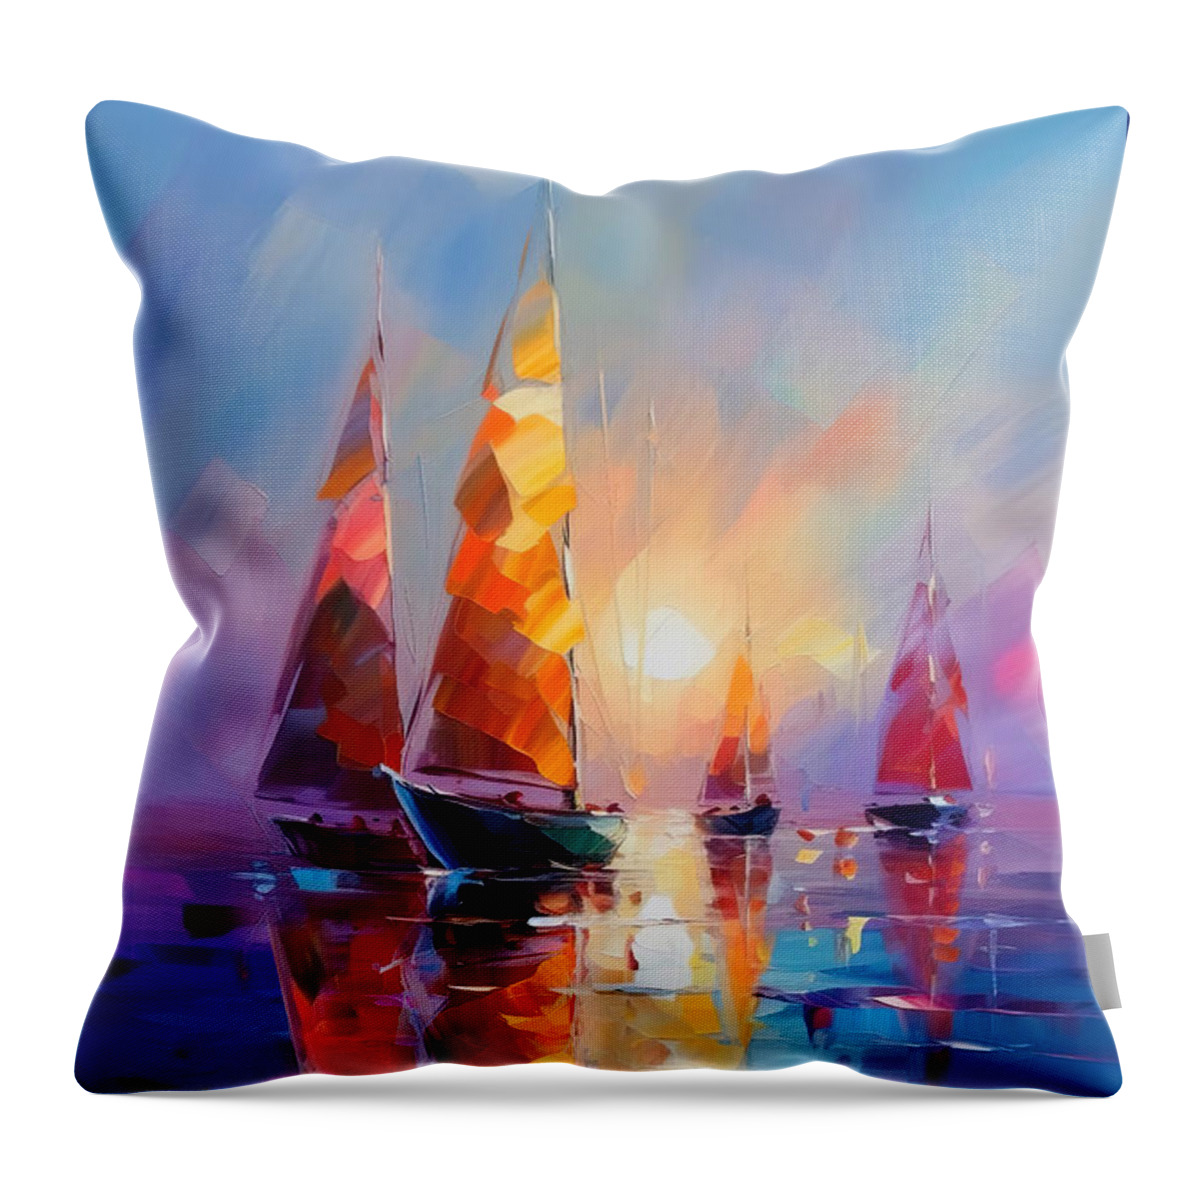 Sailboats Throw Pillow featuring the painting Sailboats In A Calm Sunset by Mark Ashkenazi